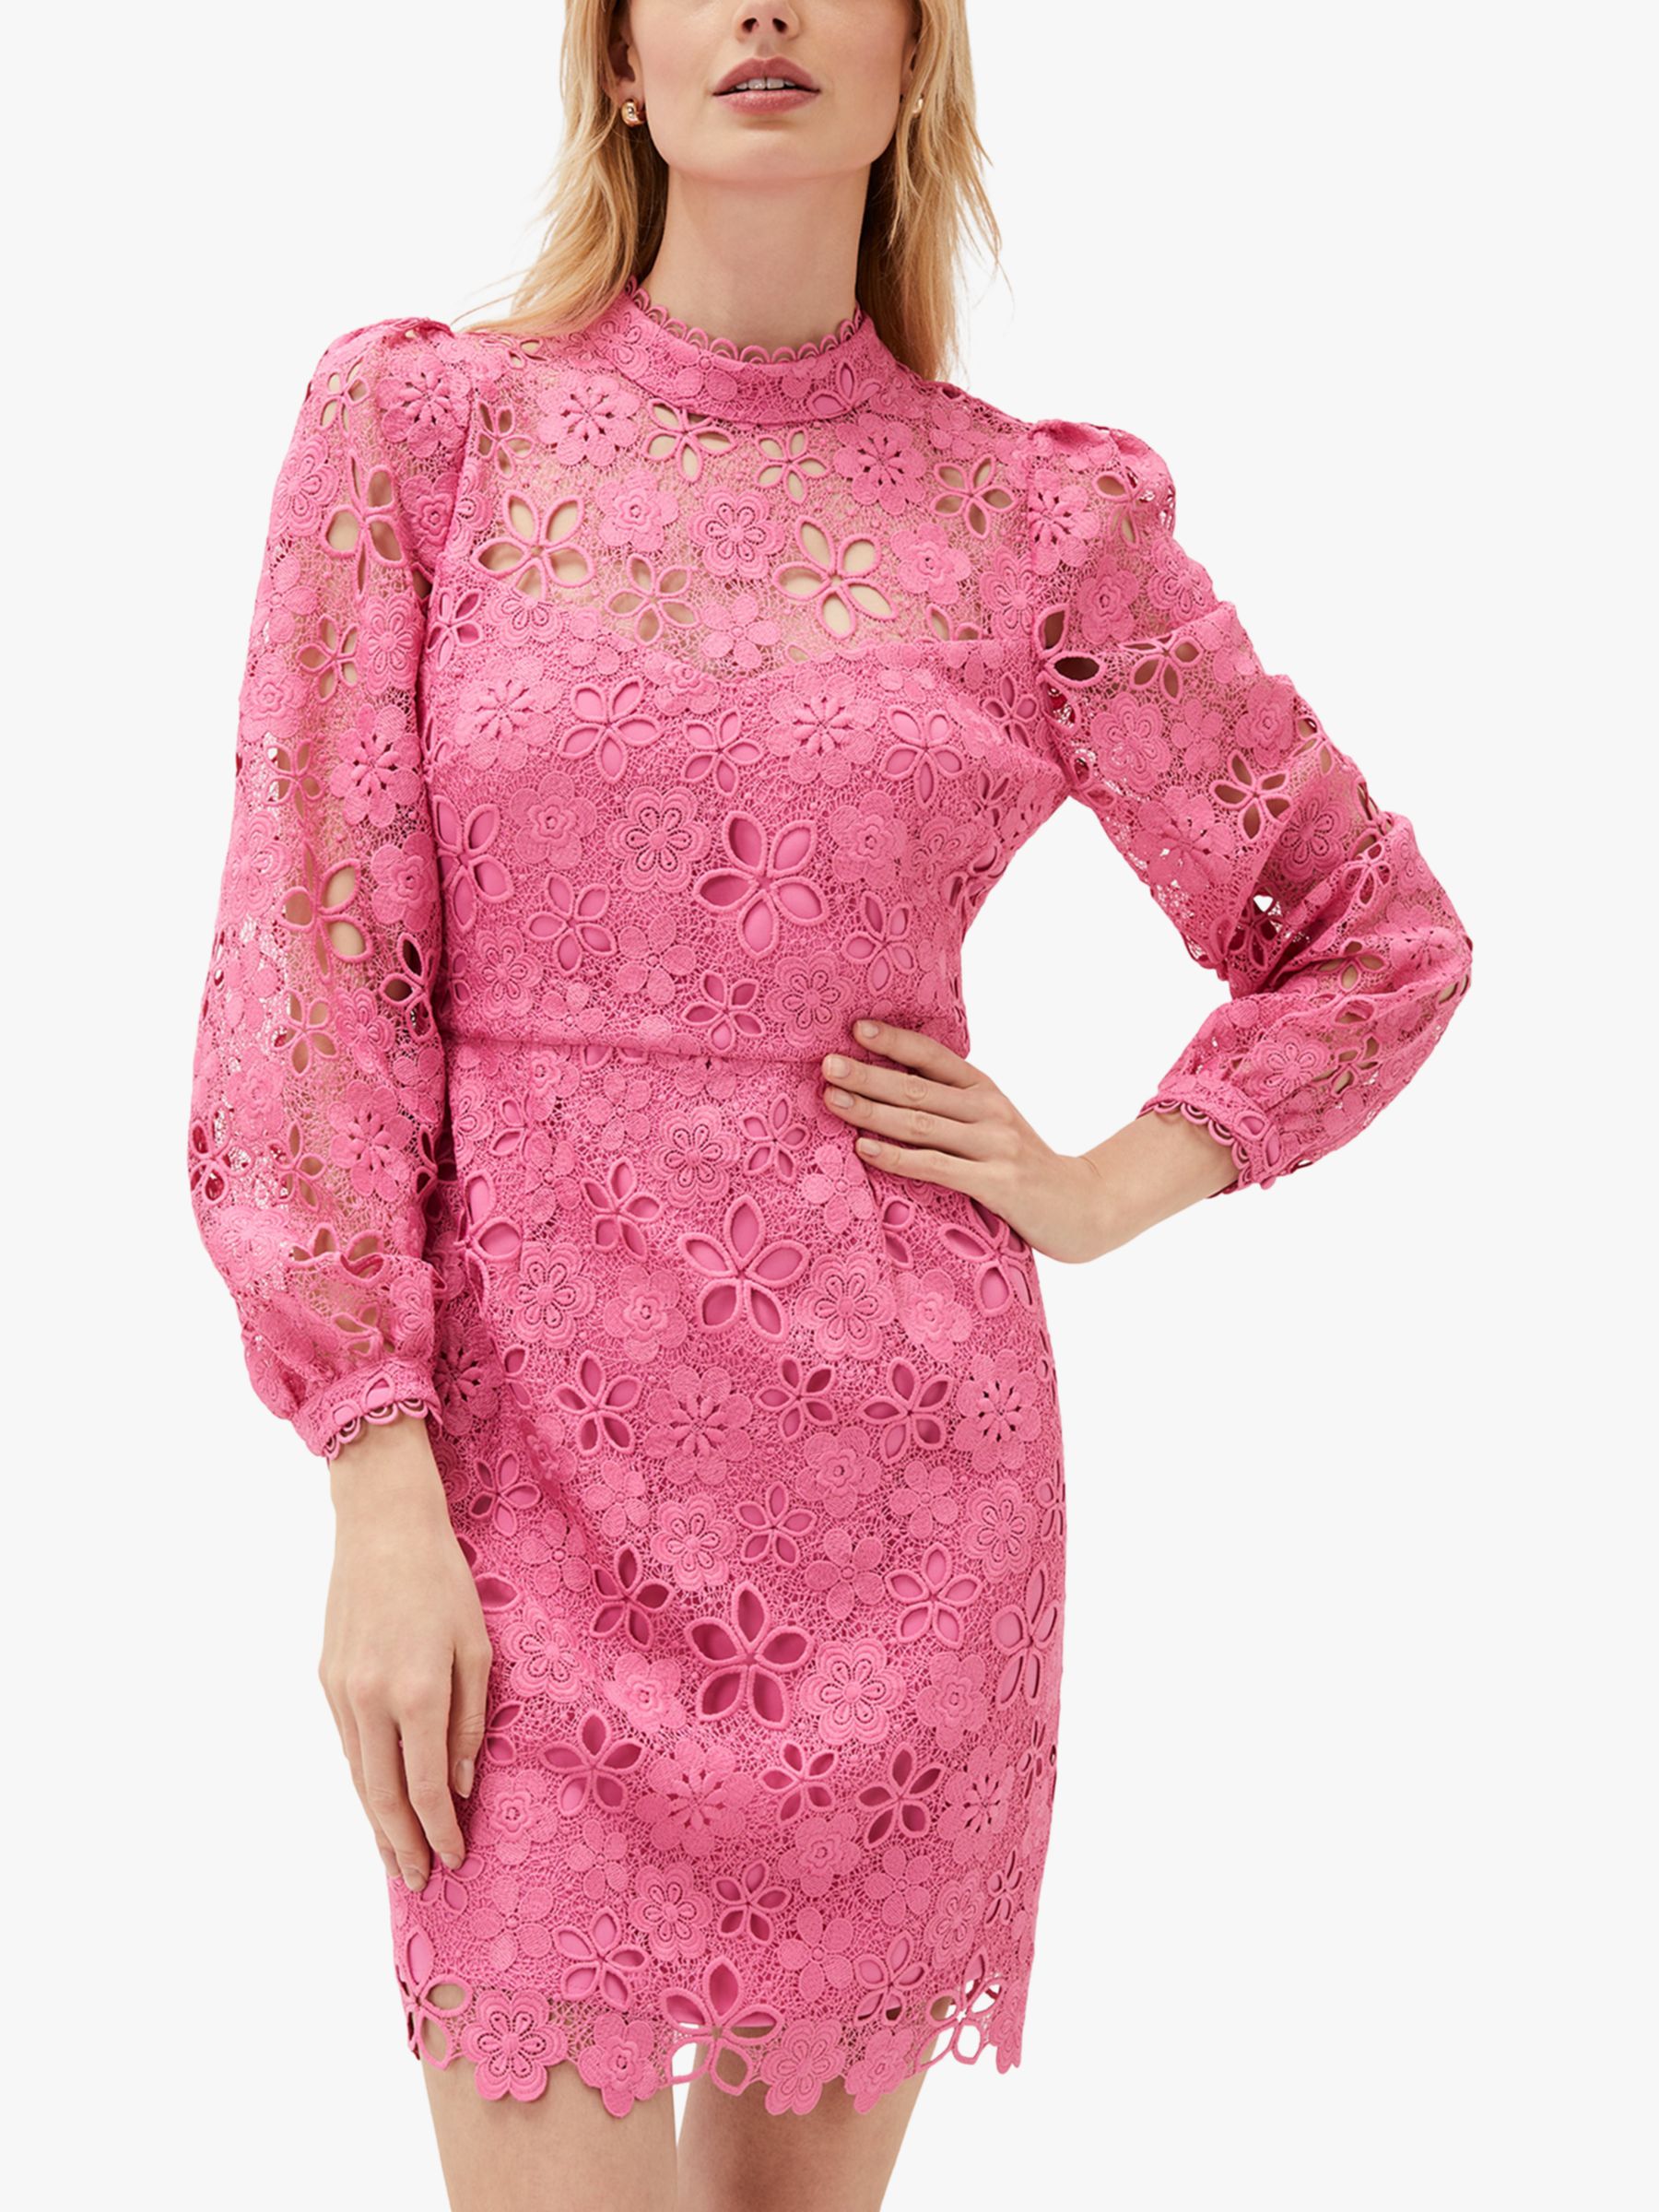 Phase Eight Doris Guipure Lace Dress, Candy Pink, 6